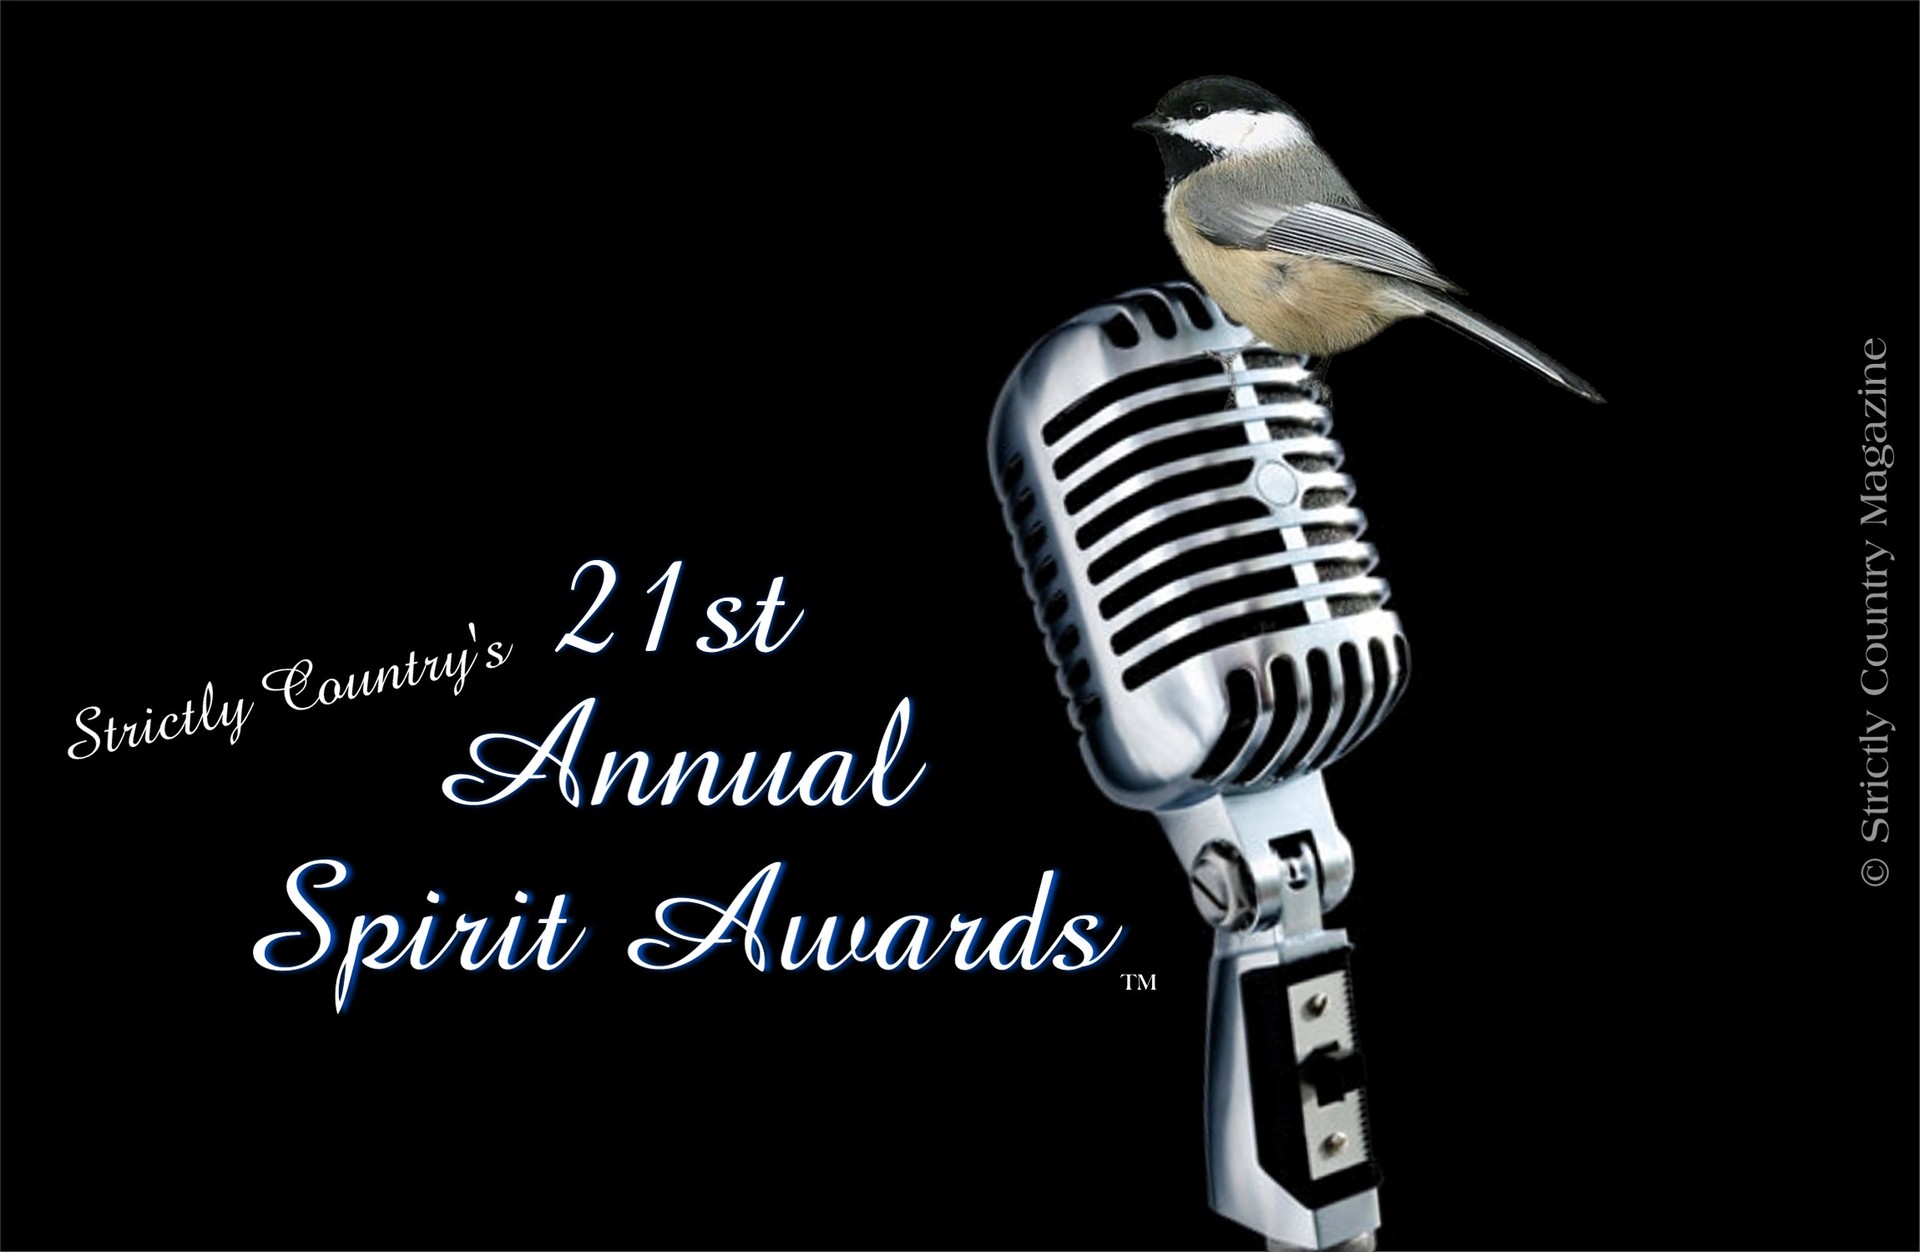 Strictly Country Magazine copyright 21st Annual Spirit Awards official logo